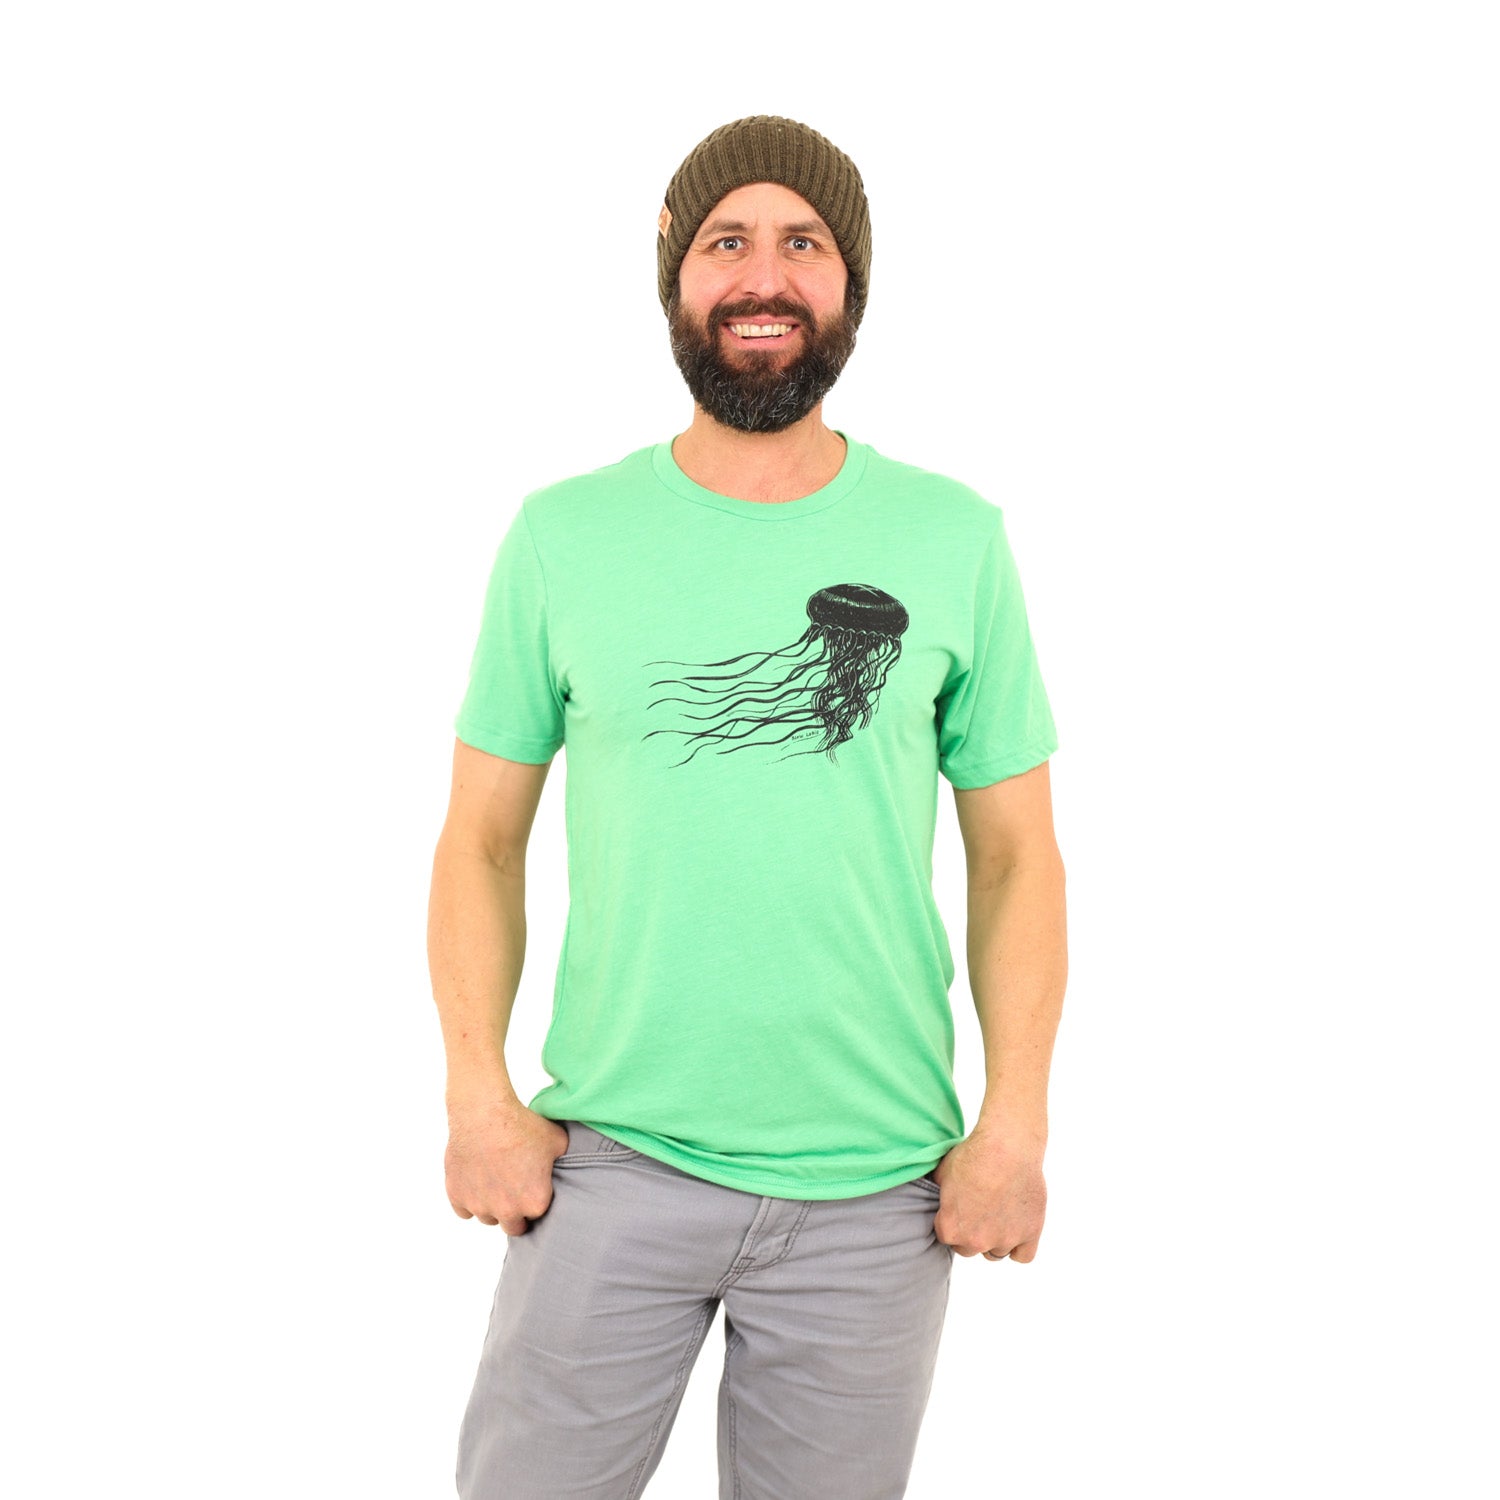  Analyzing image     12Feb2024-140  1500 × 1500px  Man with beard and beanie wearing a bright green t-shirt with a black jellyfish print across the chest